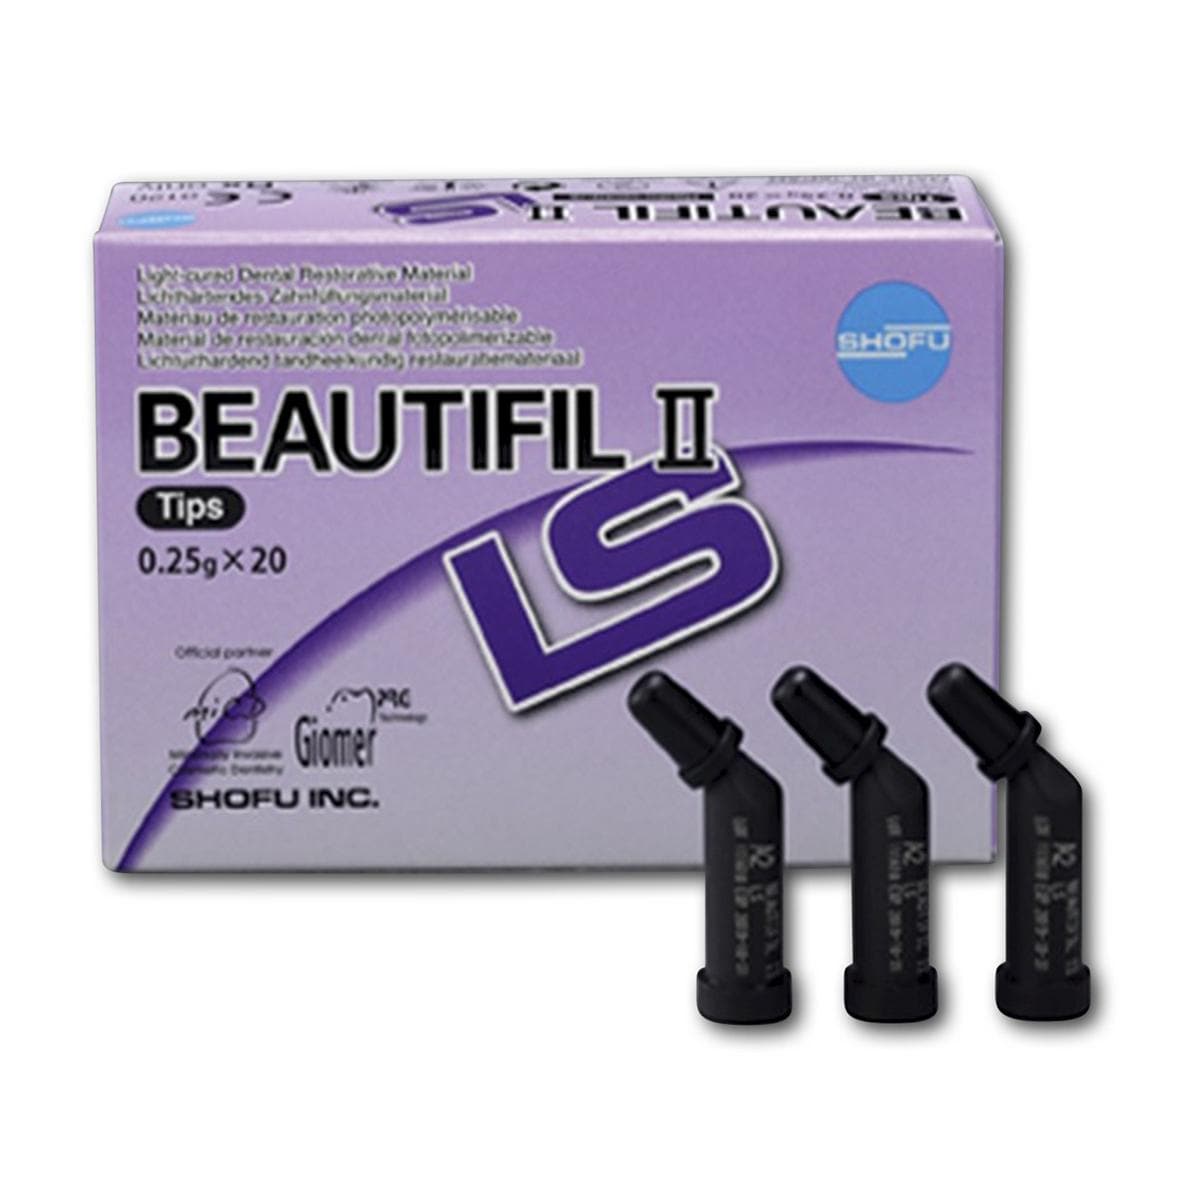 Beautifil II LS - embouts - A3.5, embouts 20 x 0,25 g